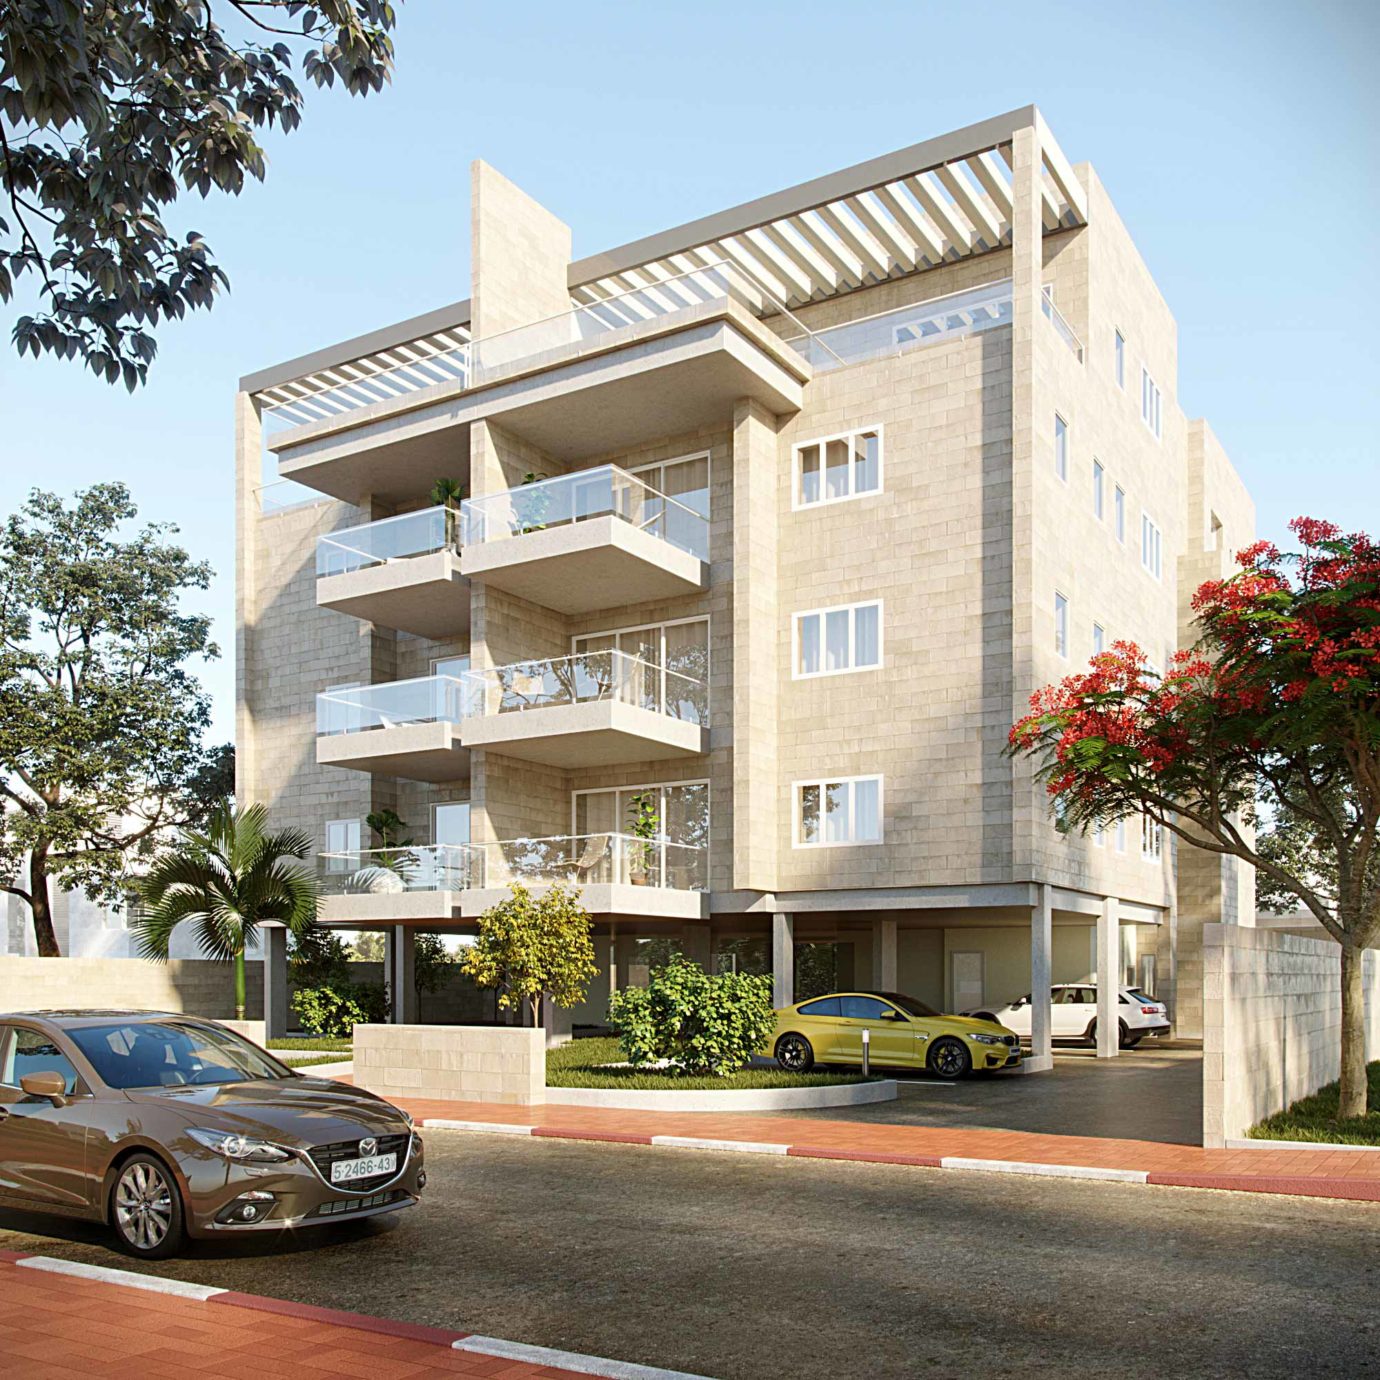 Residential building in Ness Ziona